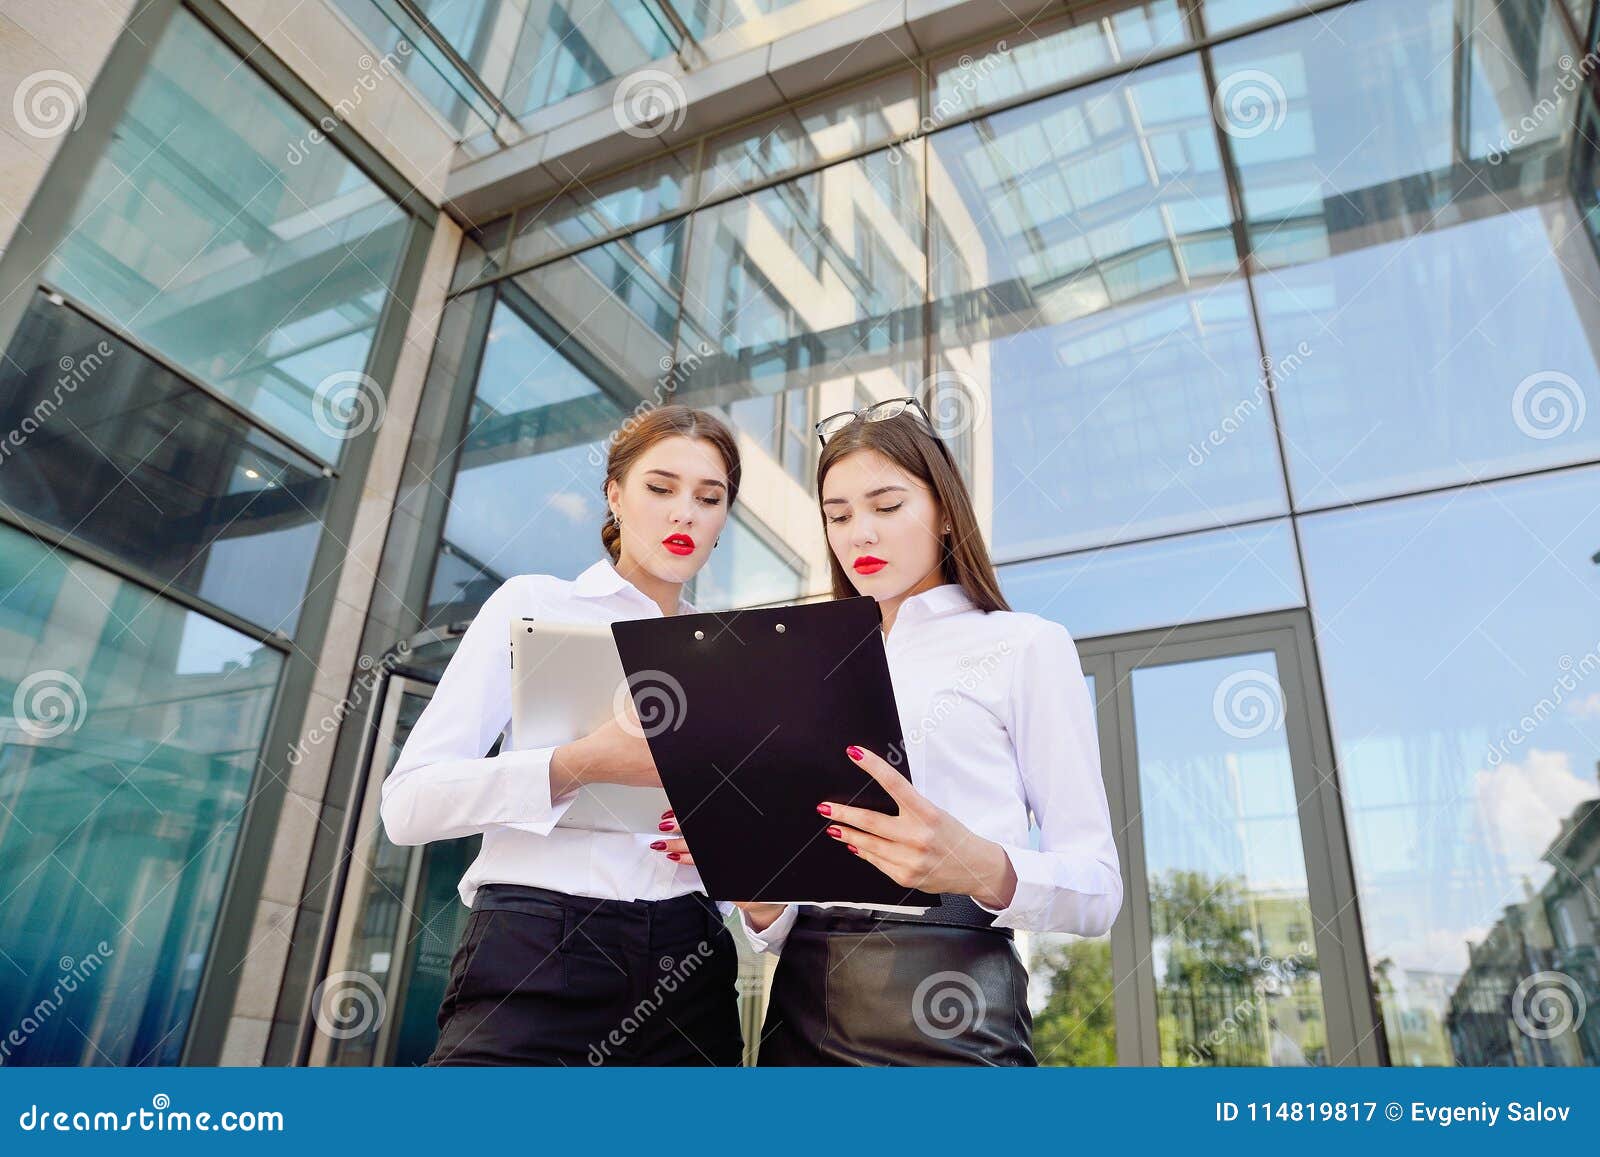 business lady. office staff. two young girls with electronic tab